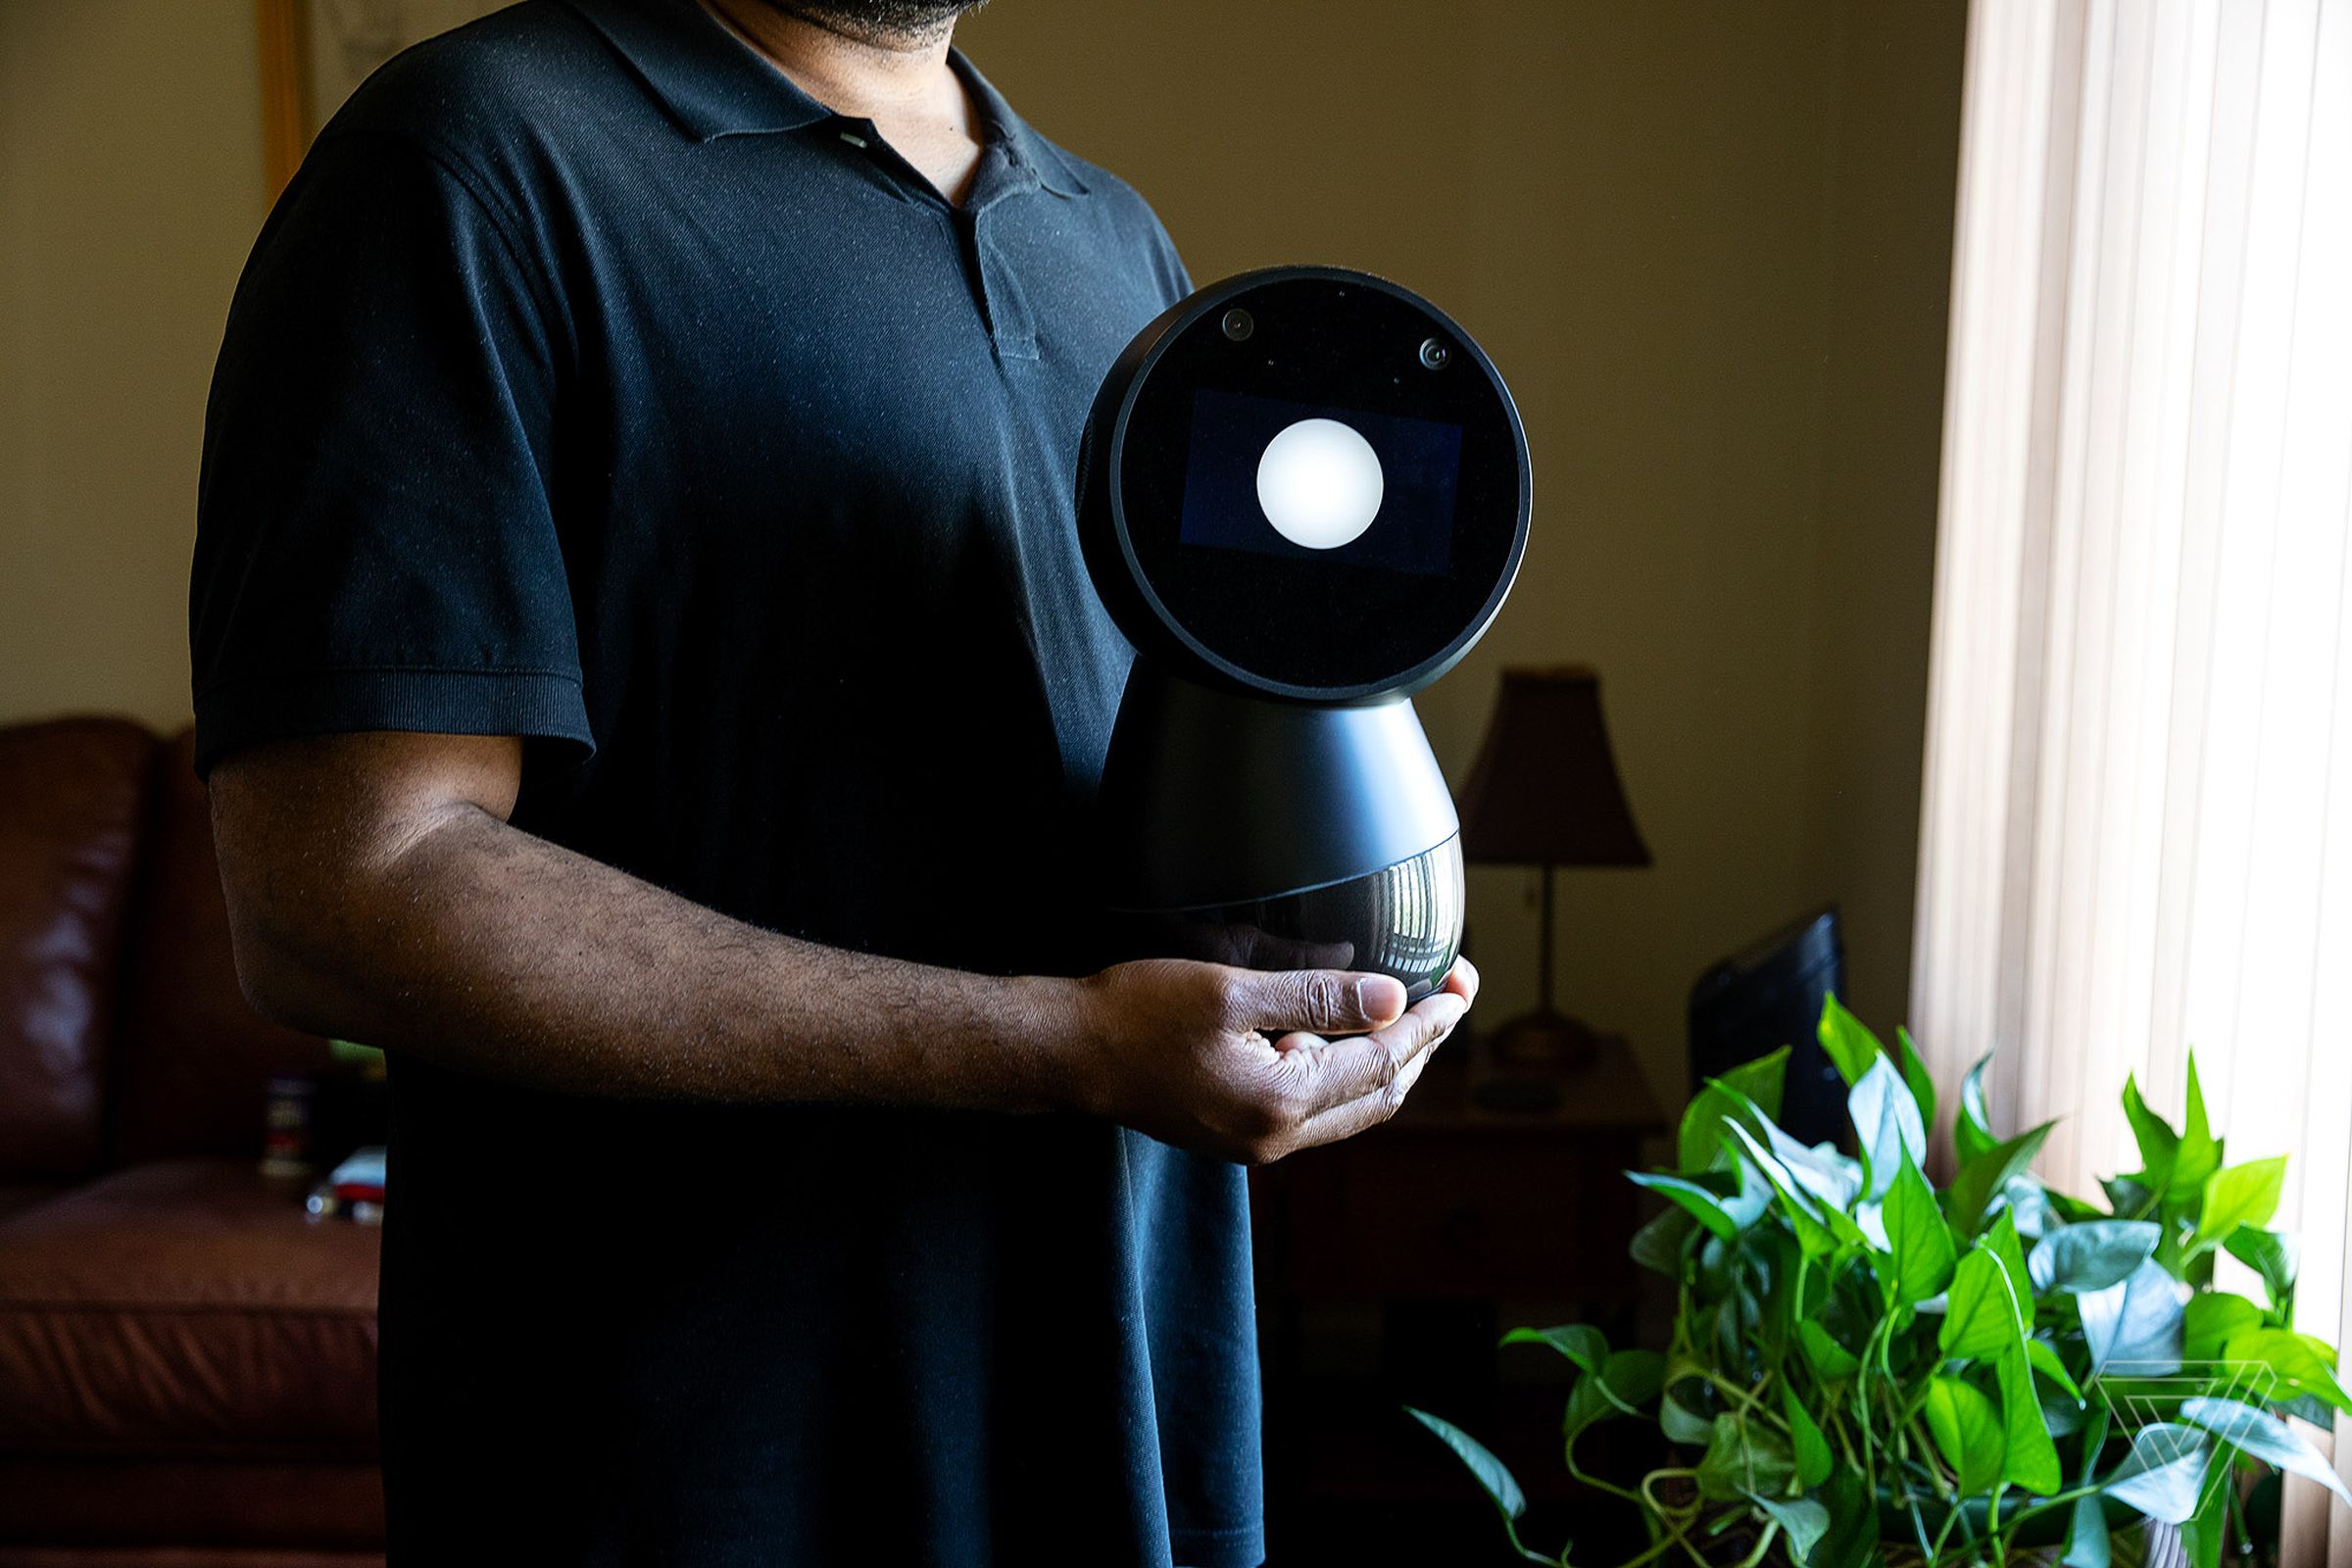 Jibo owner Kenneth Williams was “preparing for the worst.”